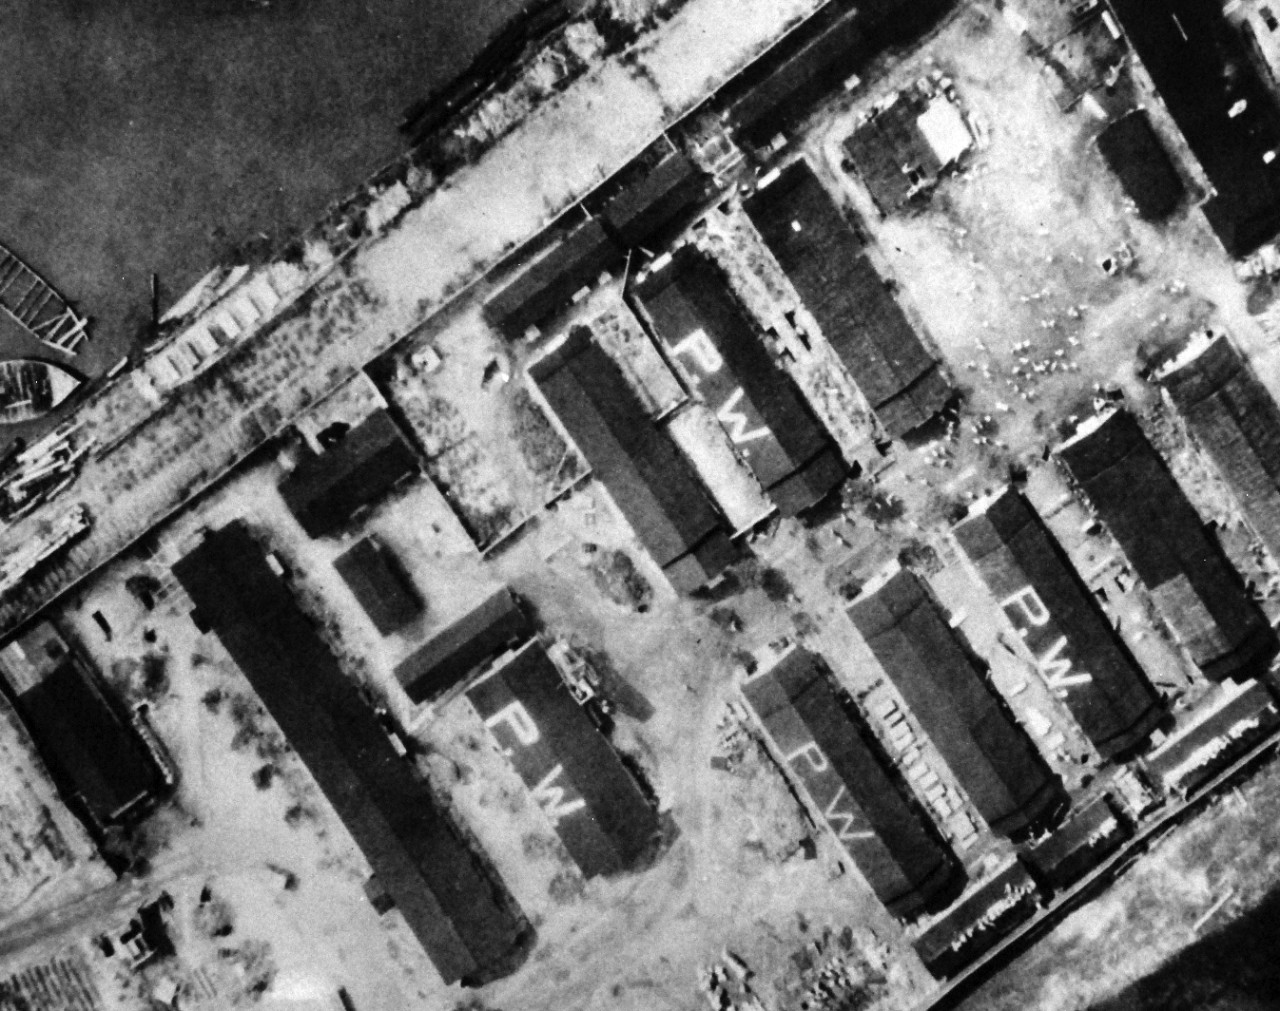 80-G-490389:  Allied Prisoner of War Camp, Tokyo, 1945.  Low aerial of Allied prisoners of war in Tokyo, Japan, area.  Note PW on the rooftops indicating prisoner of war.   Released August 29, 1945.   Official U.S. Navy Photograph, now in the collections of the National Archives.   (2015/11/10).